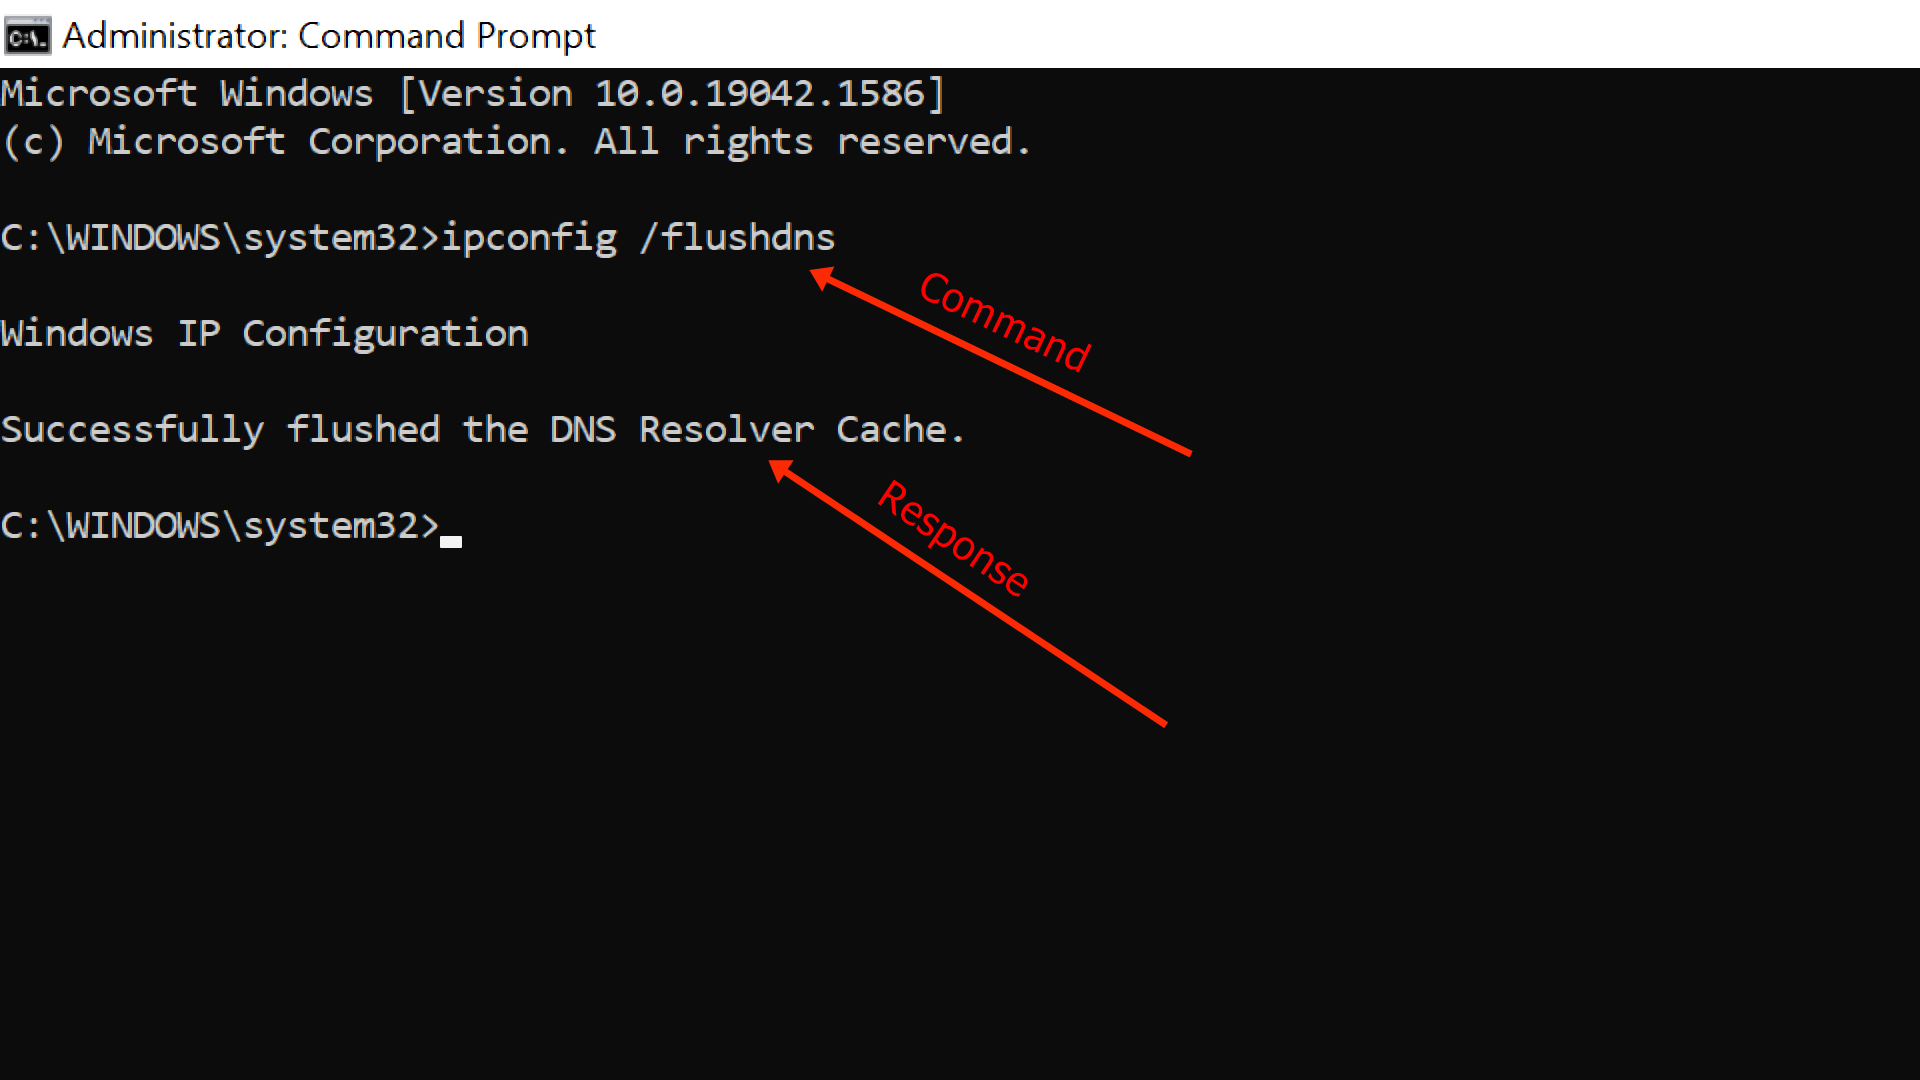 In the Command Prompt, type ipconfig /flushdns and press Enter. Wait for the message that confirms the DNS cache has been successfully flushed.